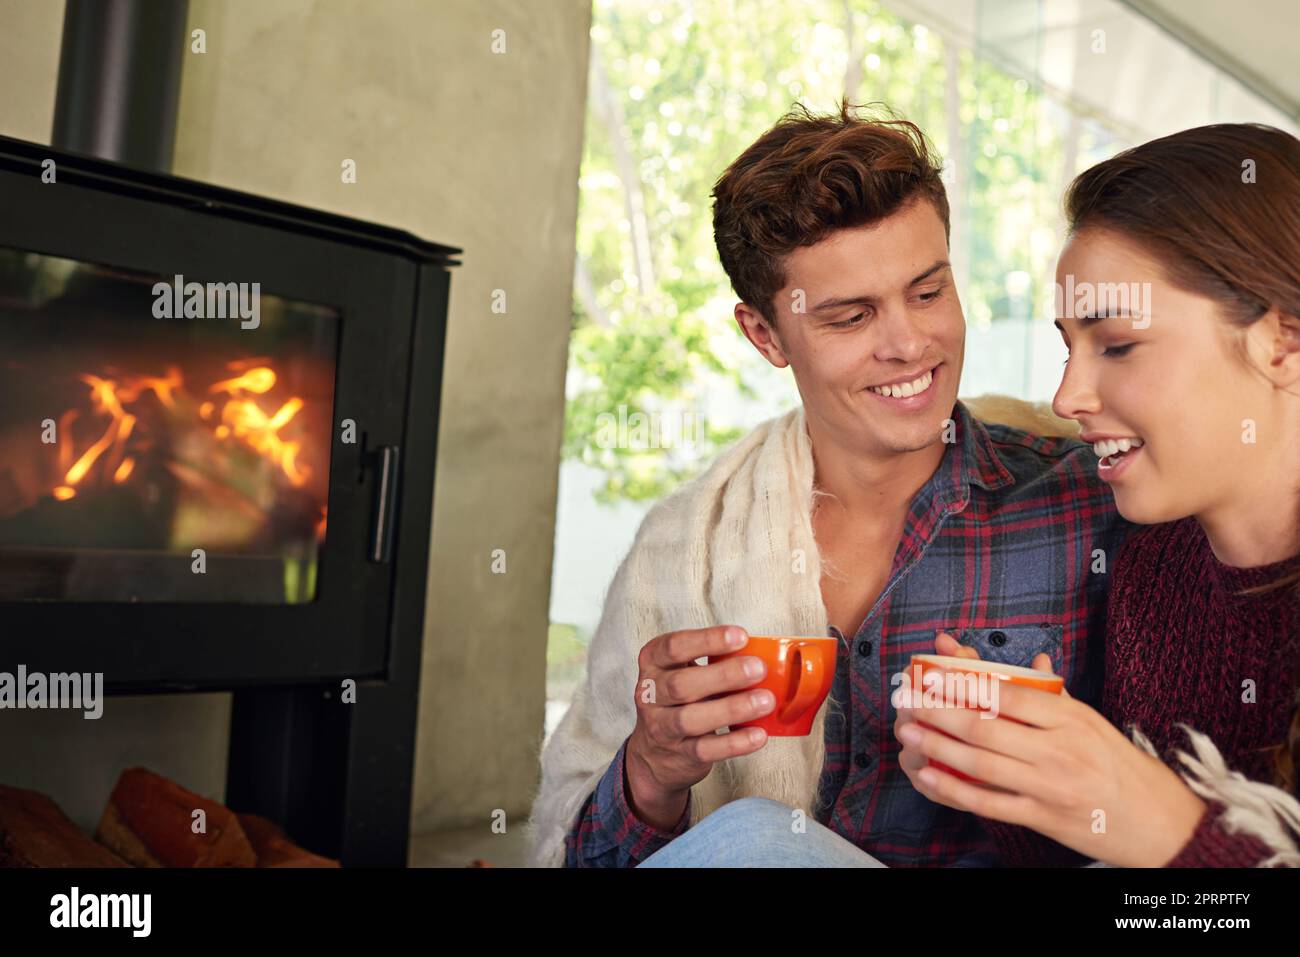 You are my warmth when I feel cold. a young couple drinking hot chocolate by the fireplace. Stock Photo